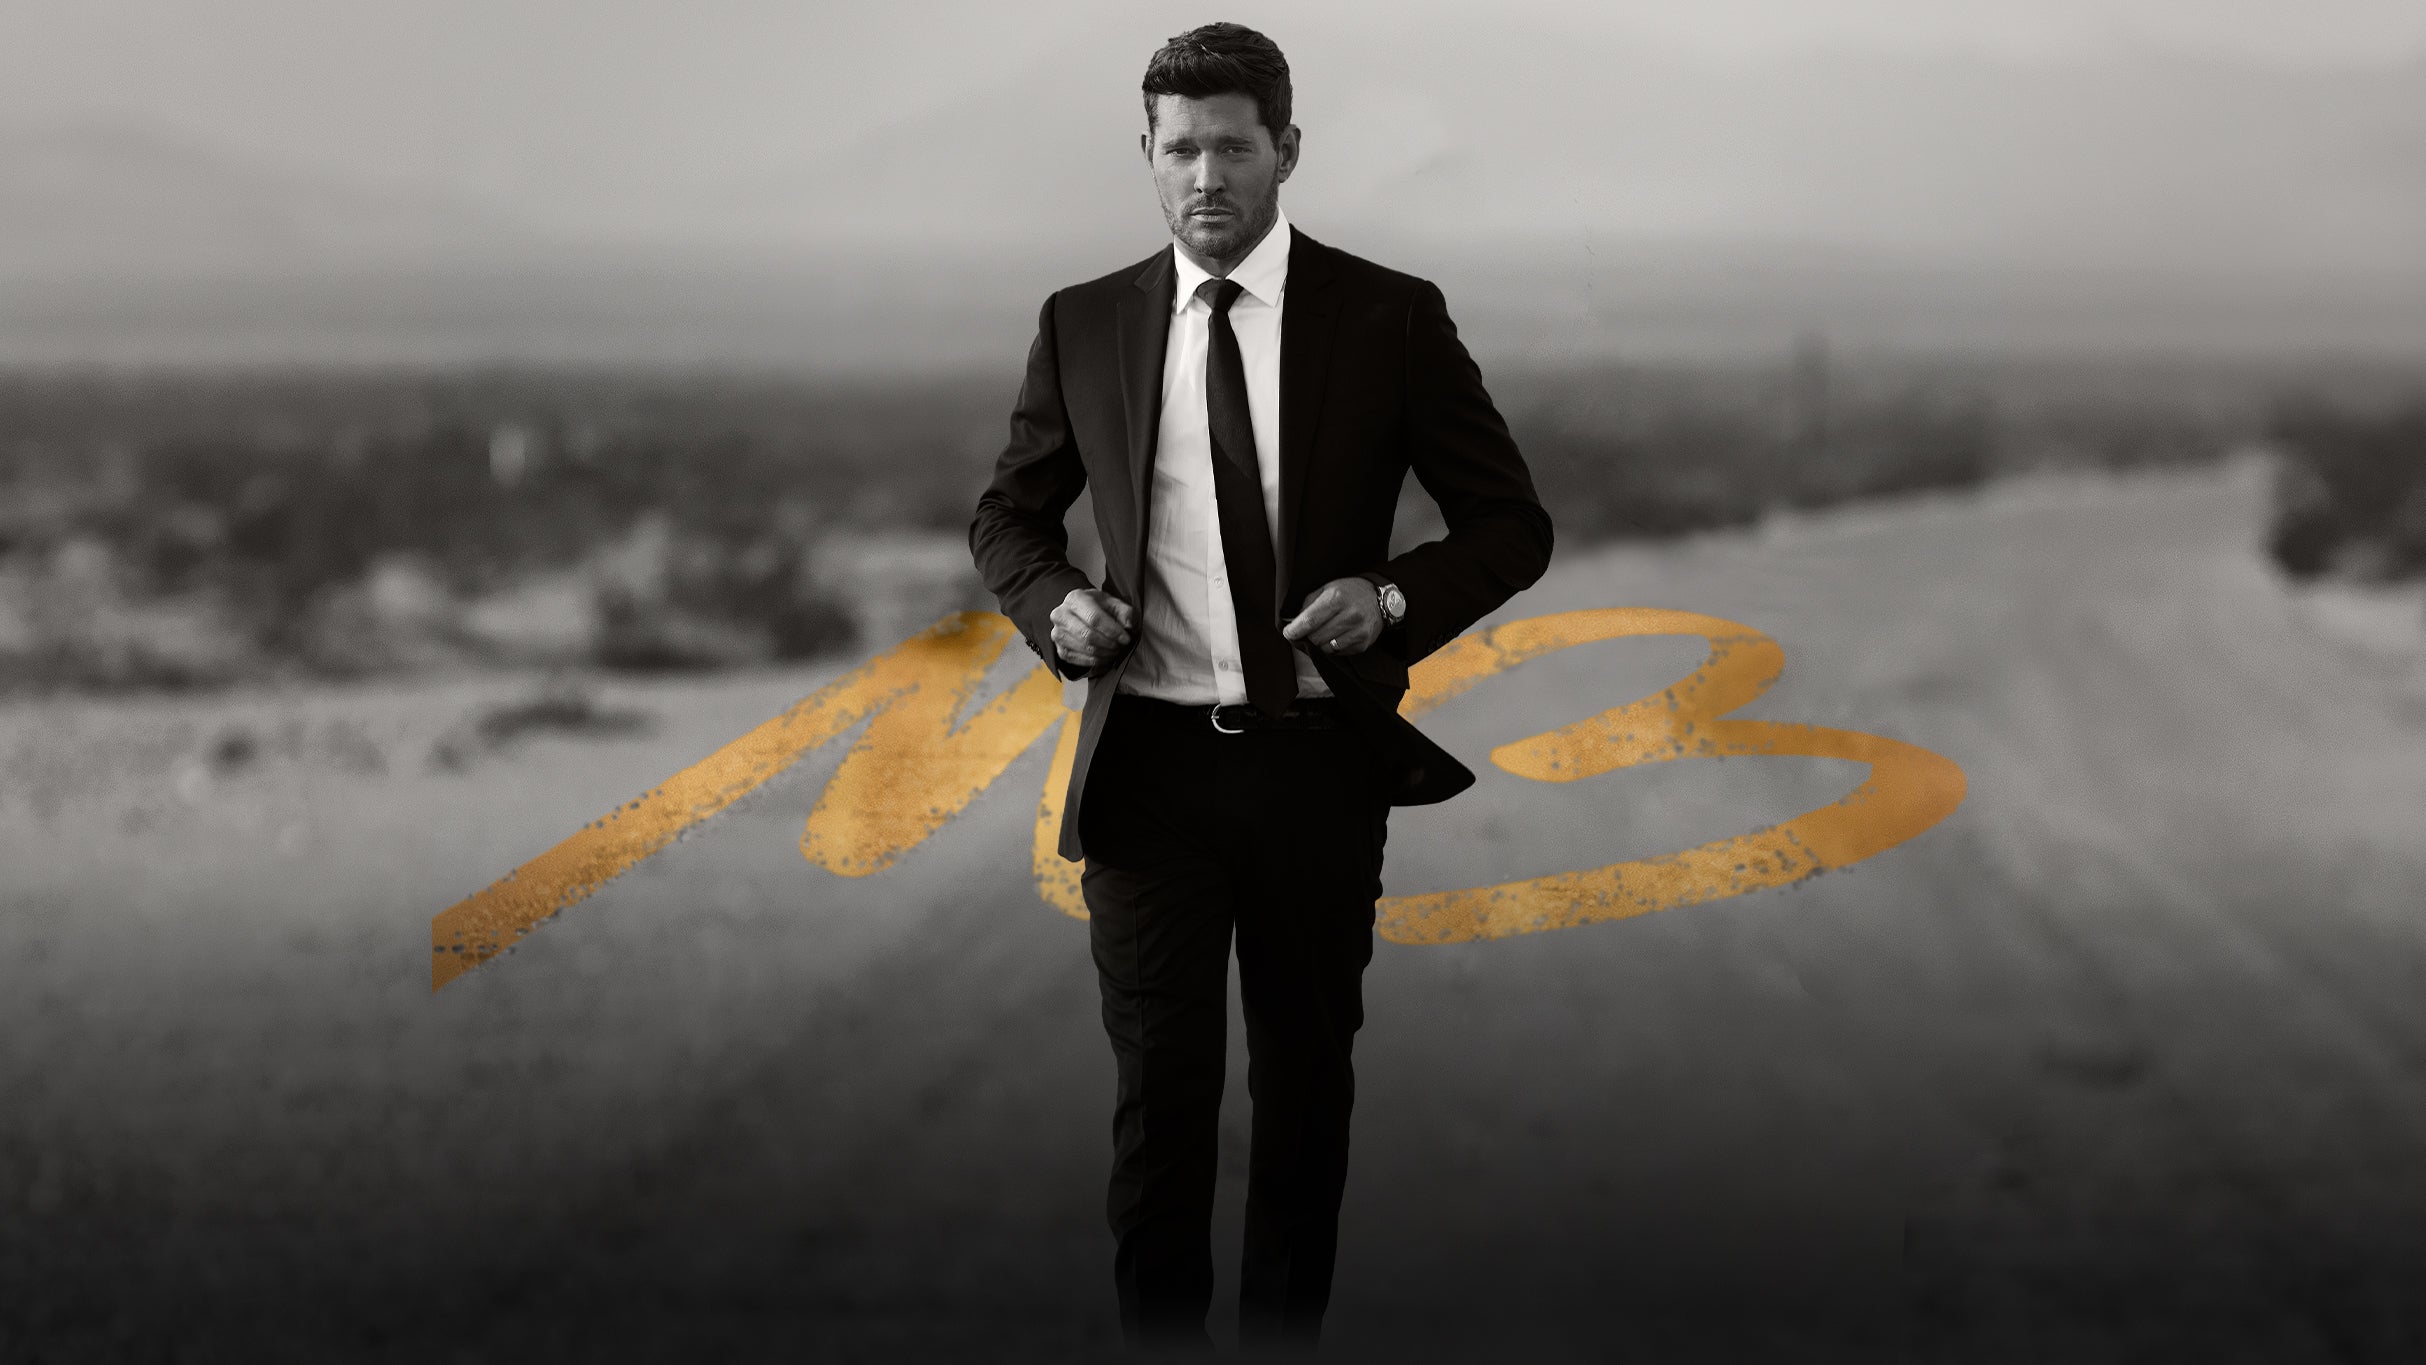 Michael Bublé One Night Only